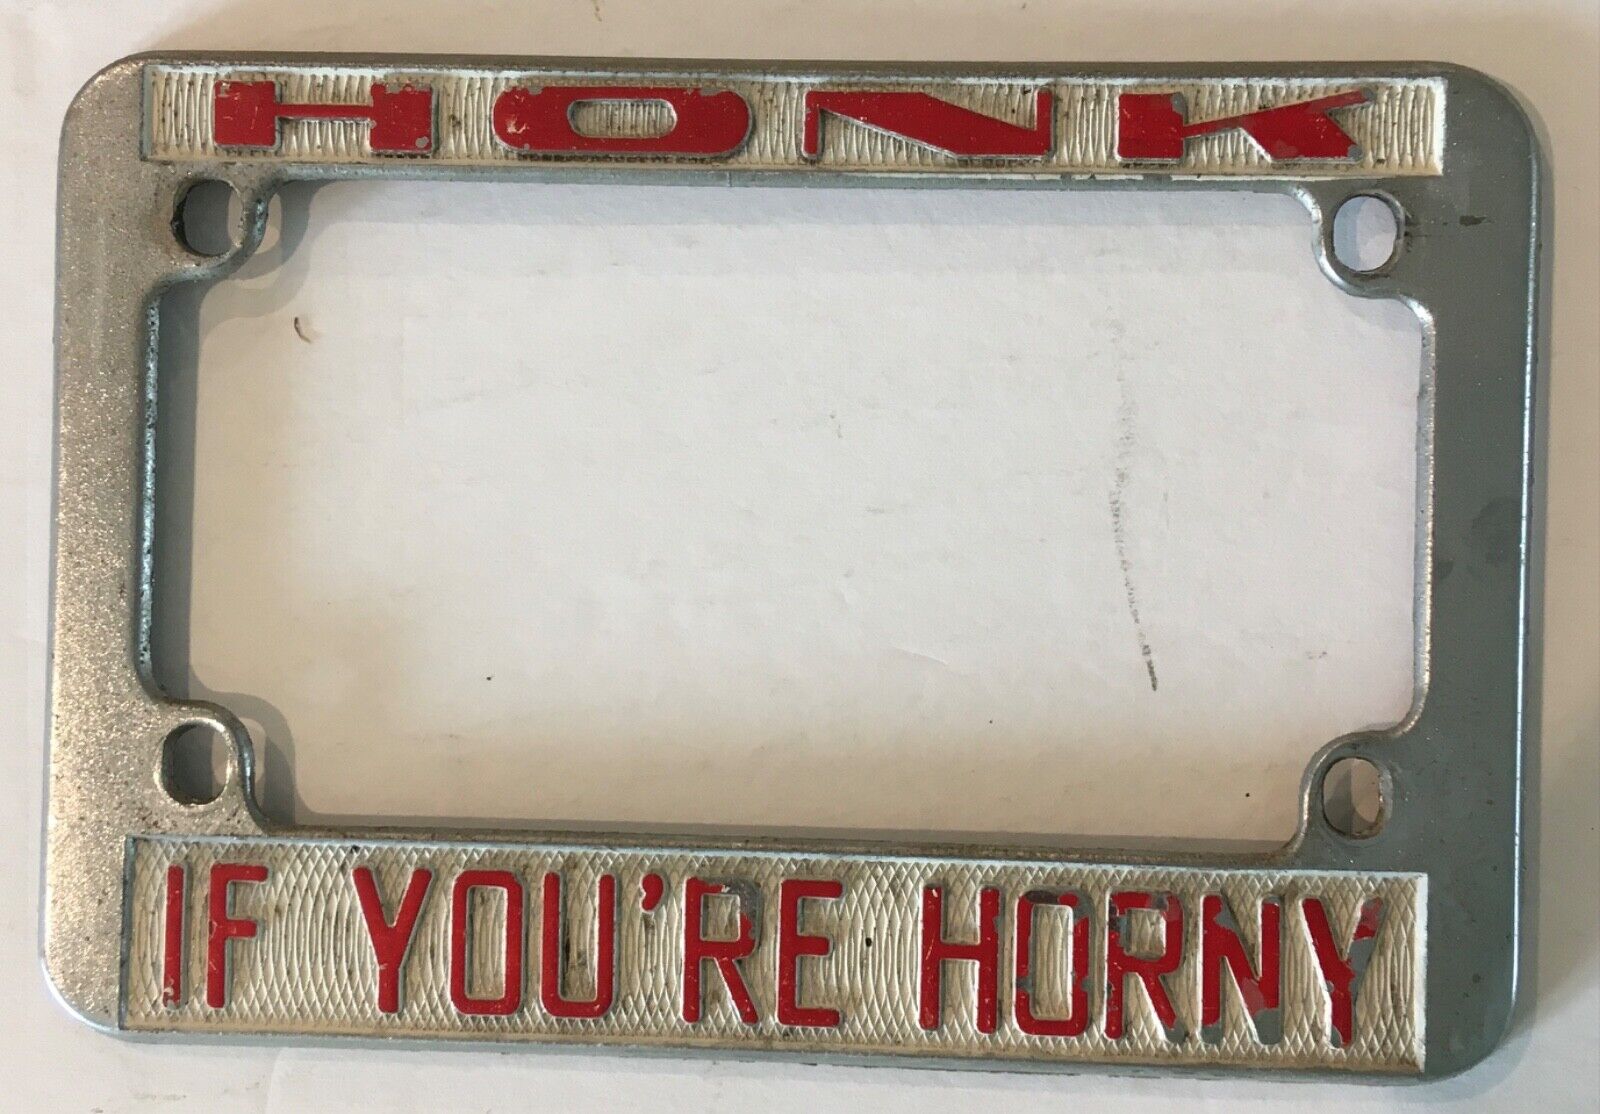 Honk If Your Horny vintage motorcycle metal license plate frame